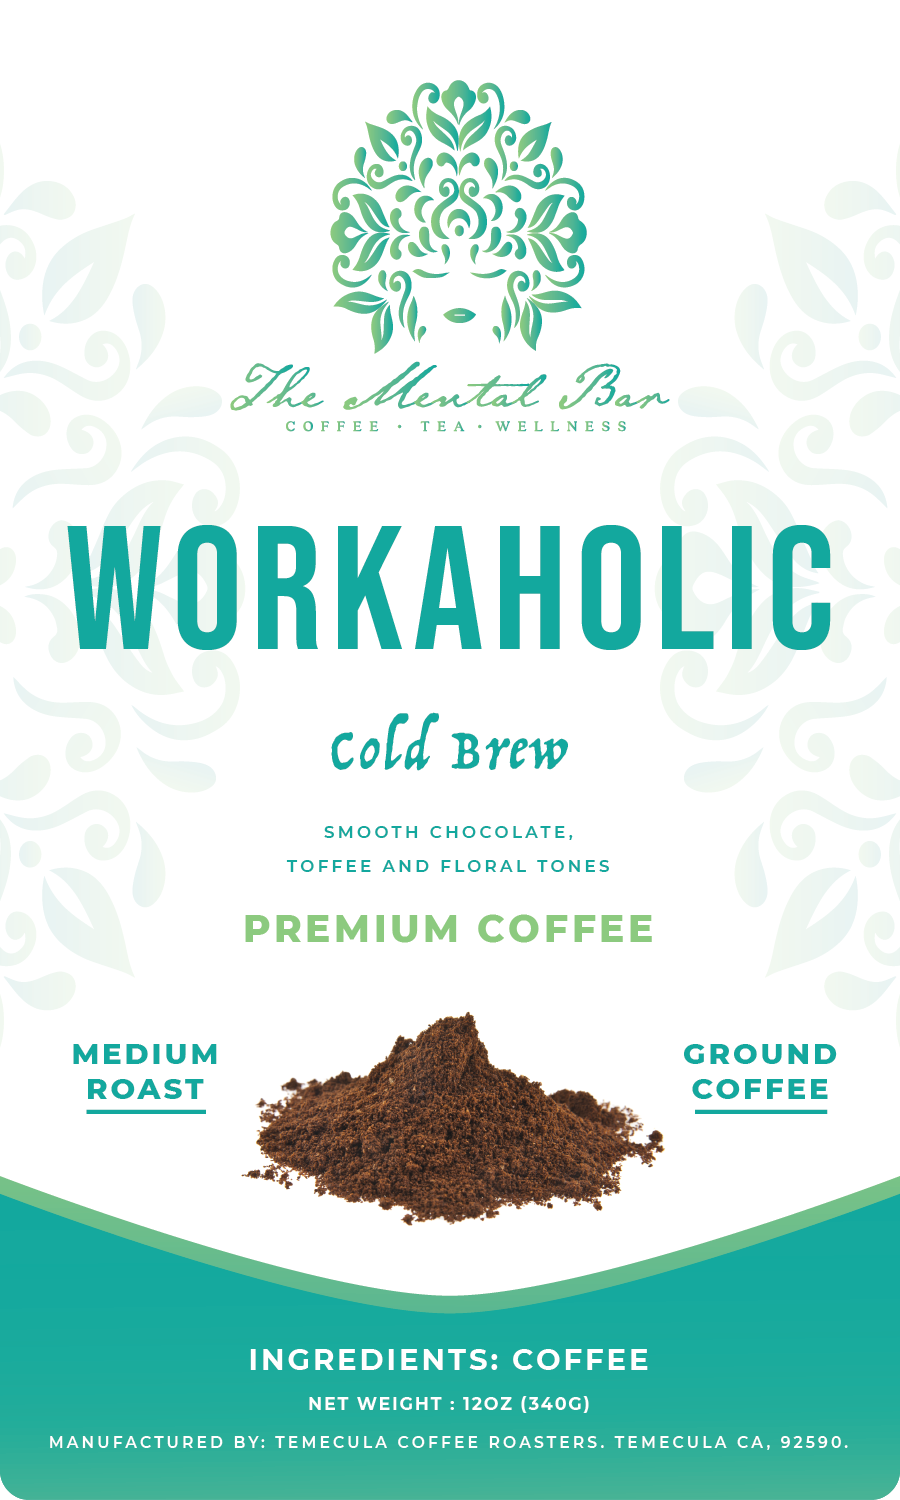 Workaholic (Cold Brew) - The Mental Bar